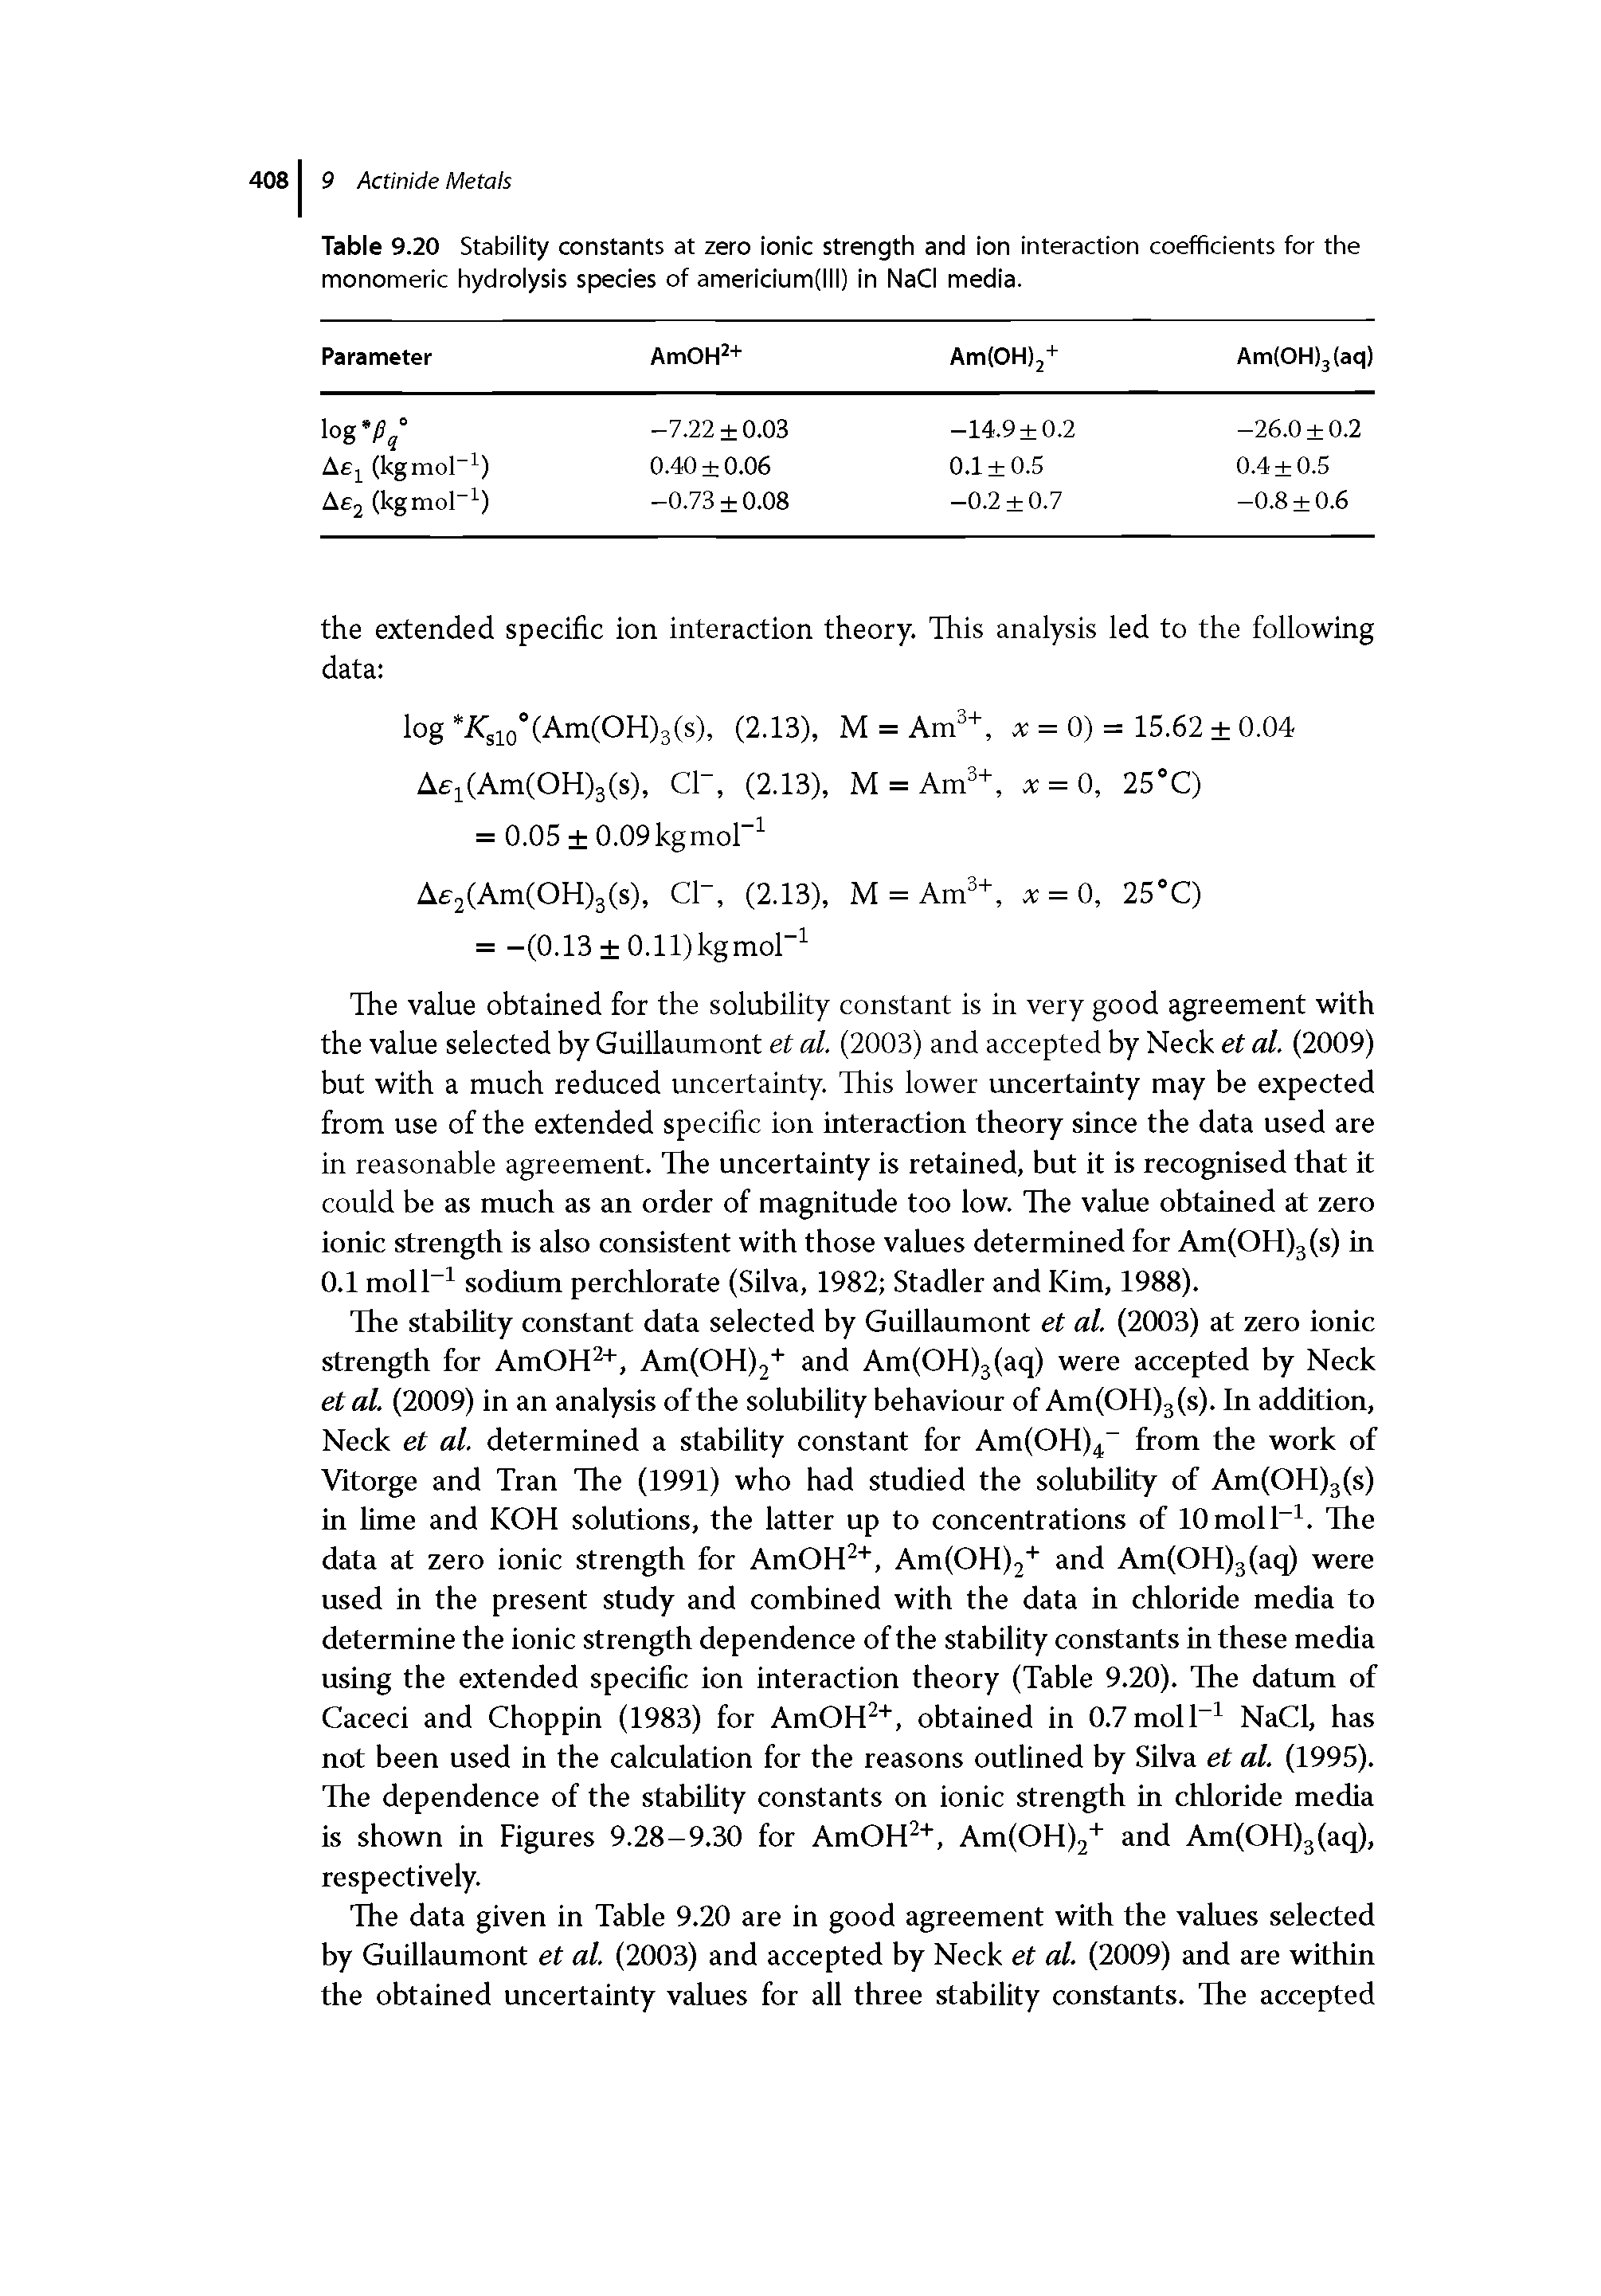 Table 9.20 Stability constants at zero ionic strength and ion interaction coefficients for the monomeric hydrolysis species of americium(lll) in NaCI media.